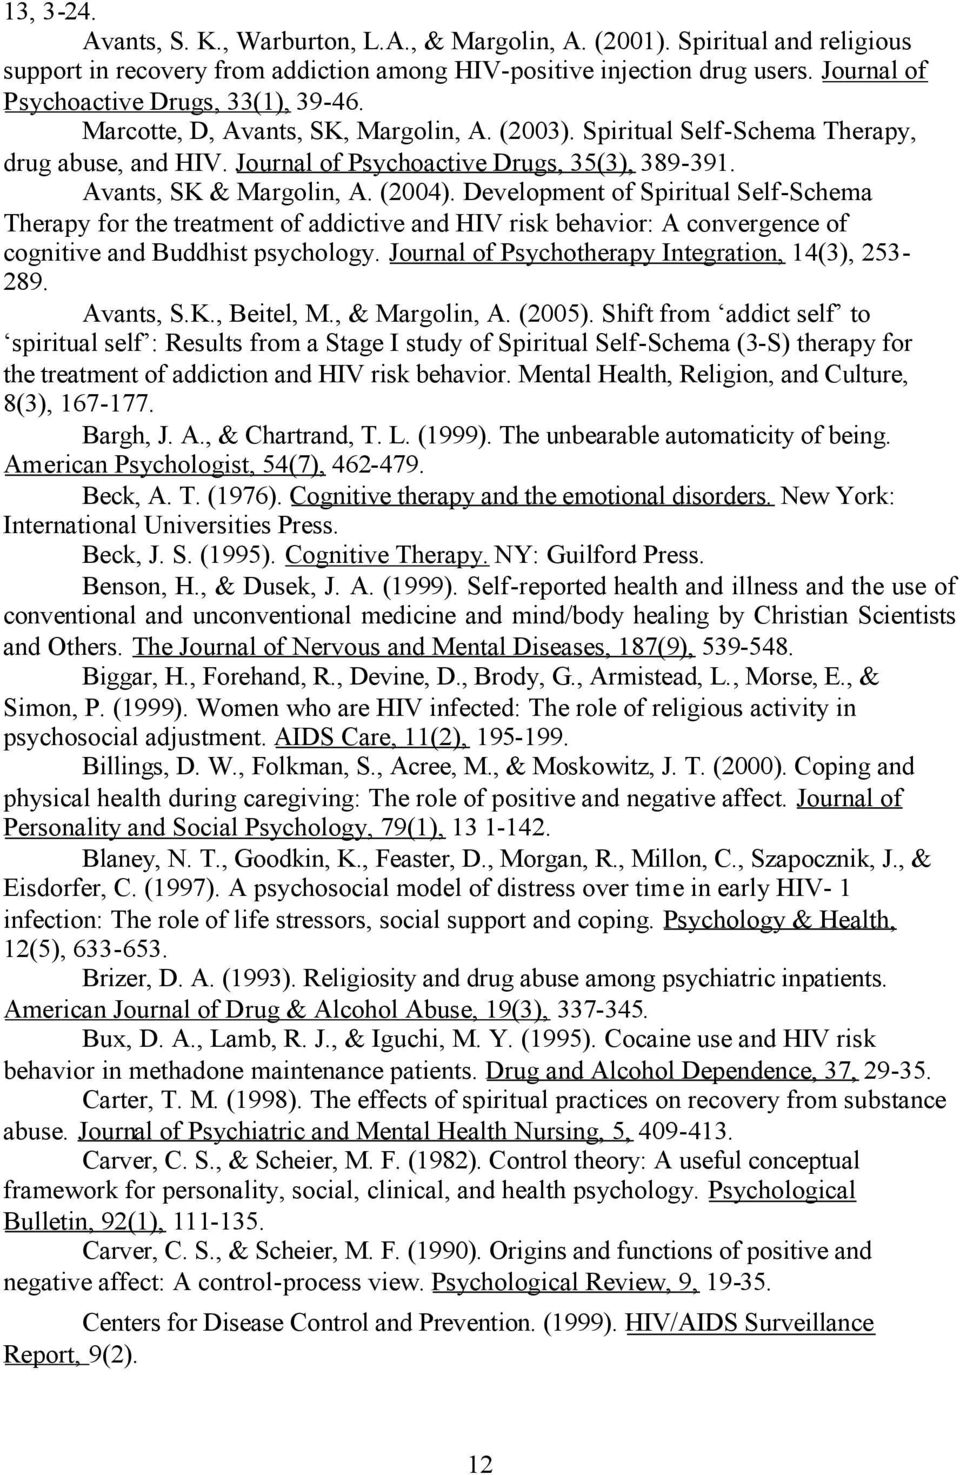 Avants, SK & Margolin, A. (2004). Development of Spiritual Self-Schema Therapy for the treatment of addictive and HIV risk behavior: A convergence of cognitive and Buddhist psychology.